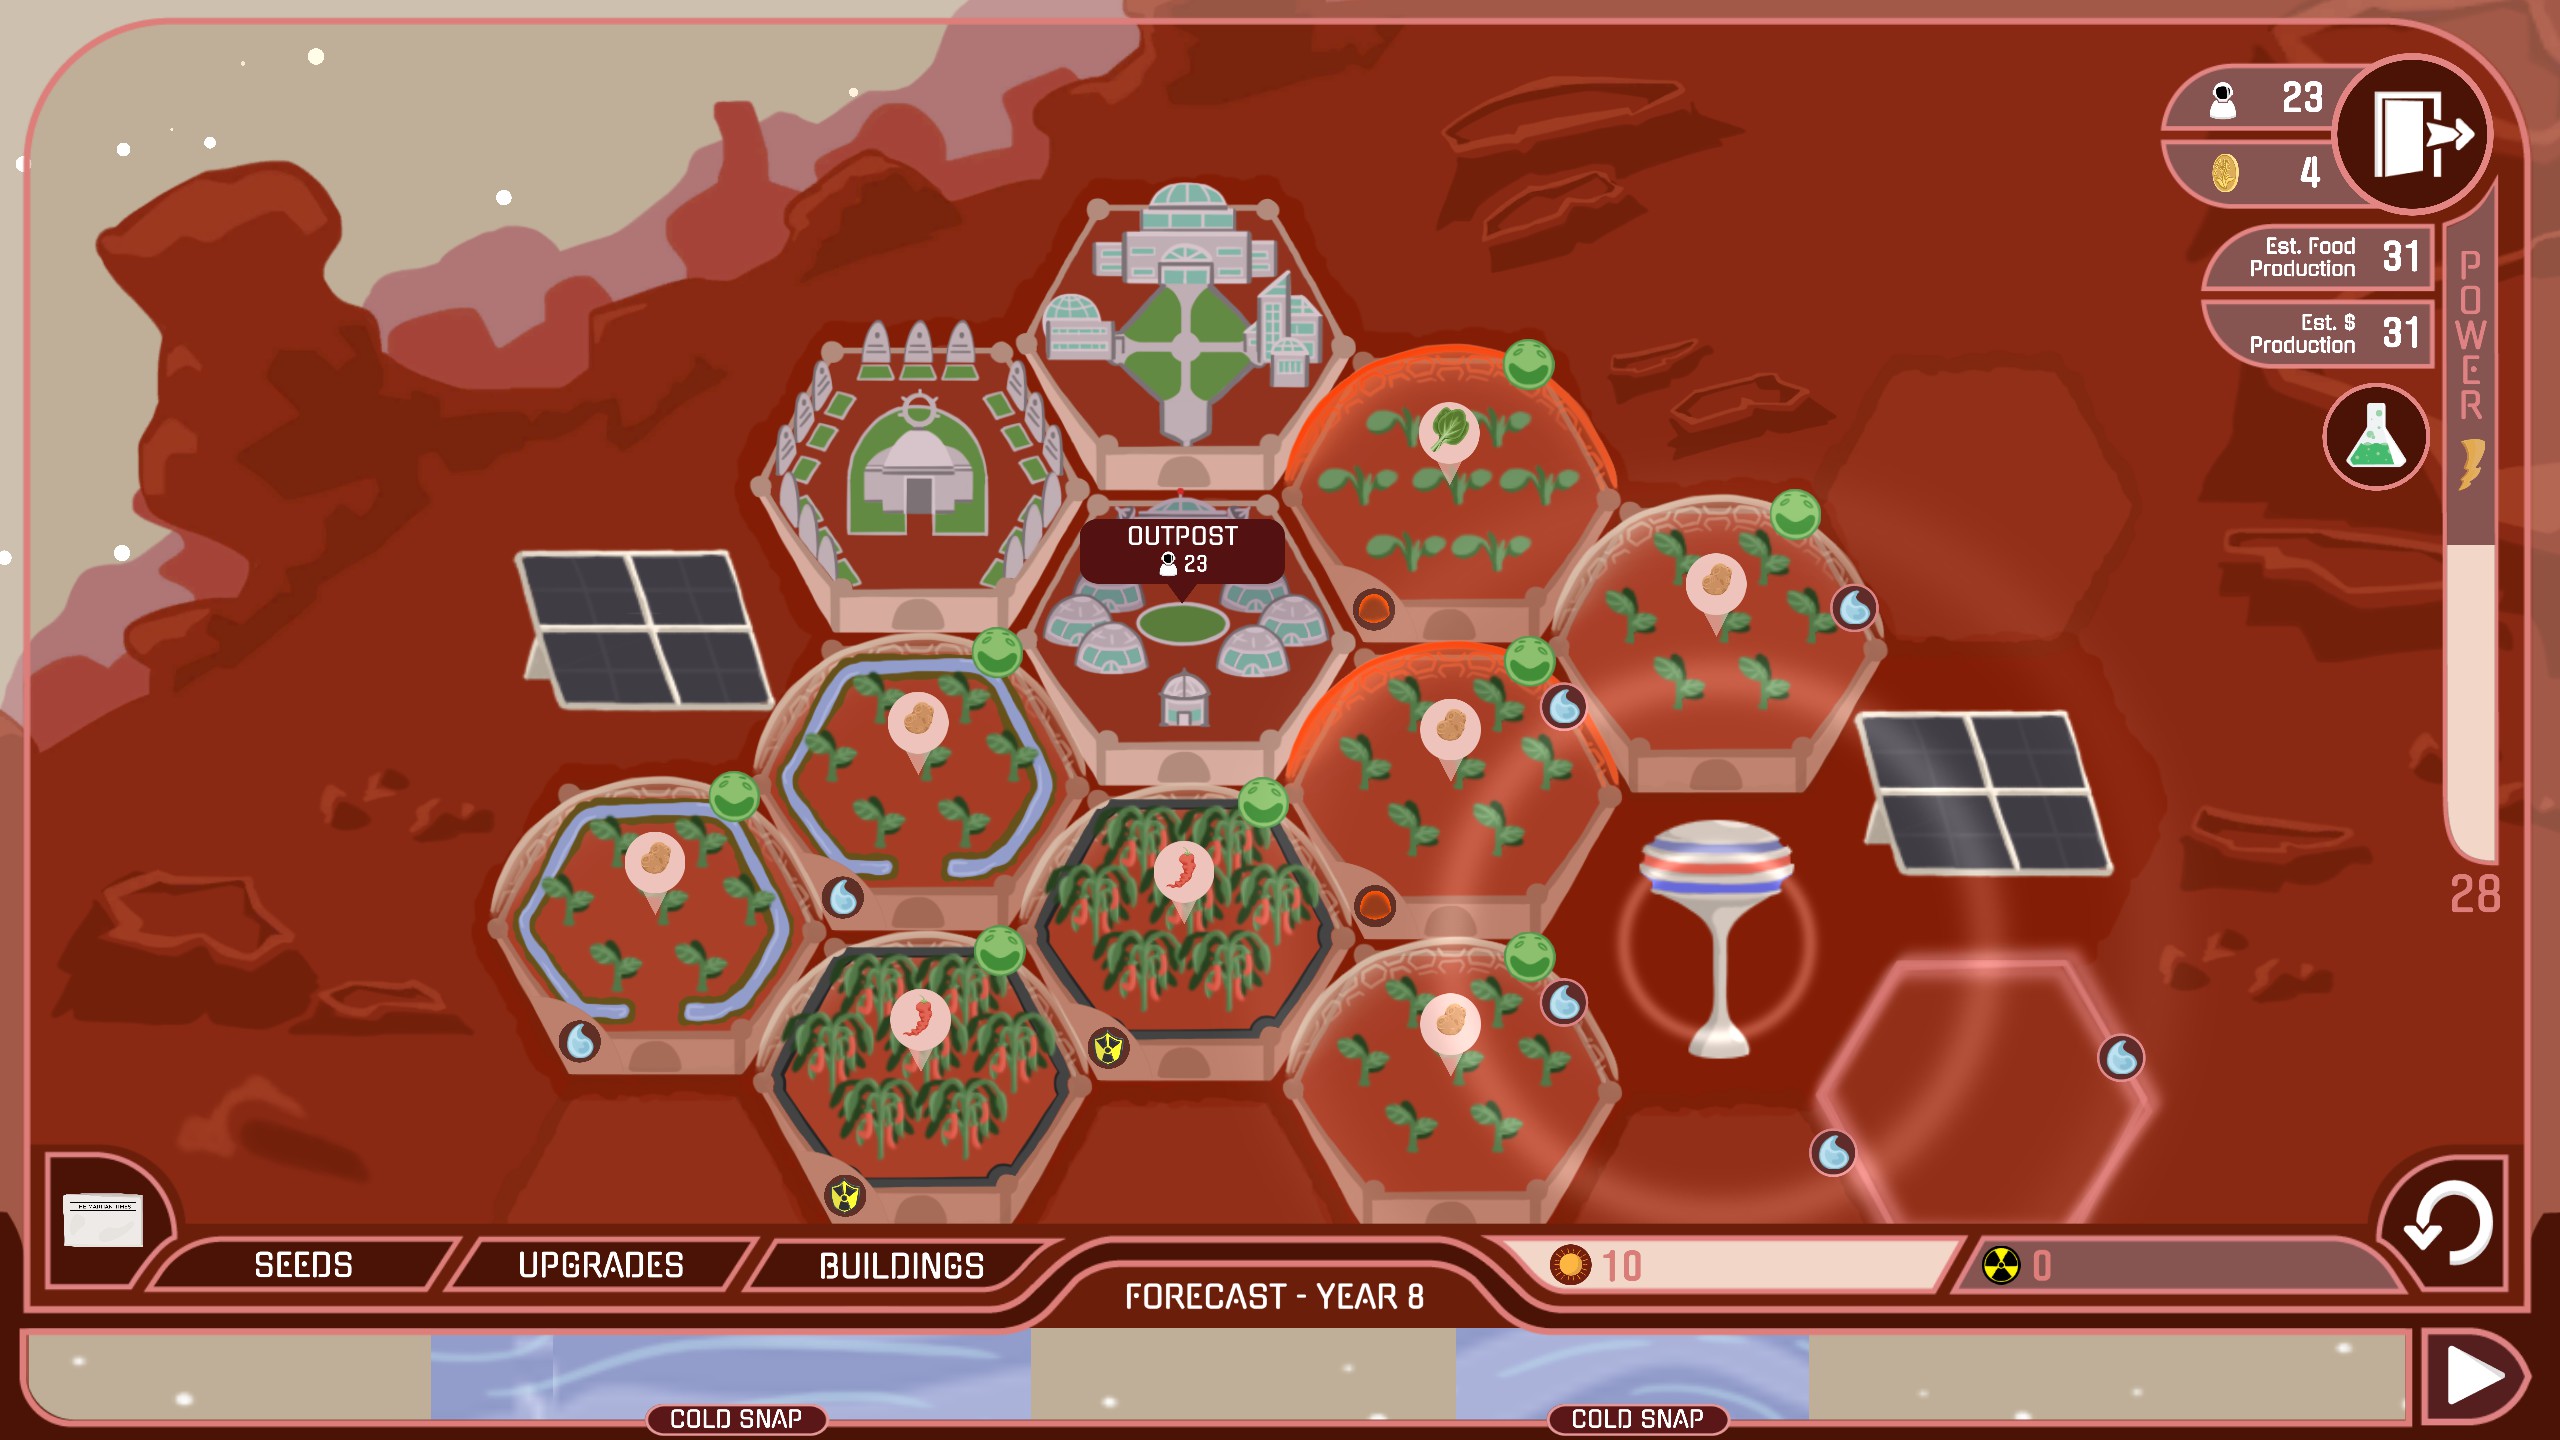 If you need a break from Earth, here's a neat free game about farming on Mars